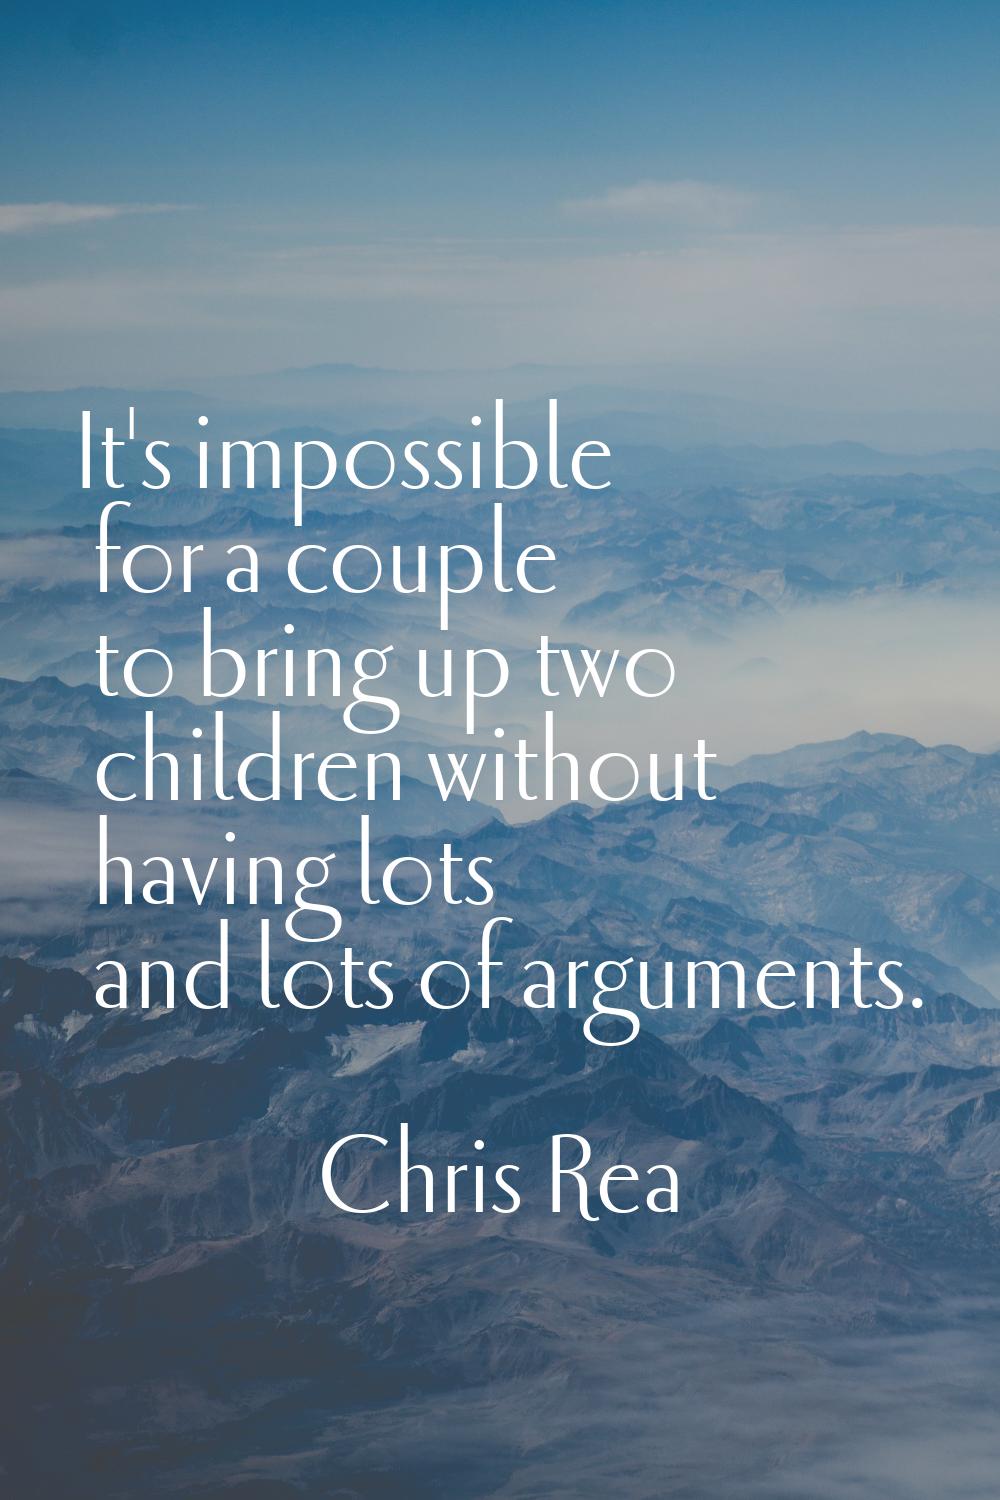 It's impossible for a couple to bring up two children without having lots and lots of arguments.